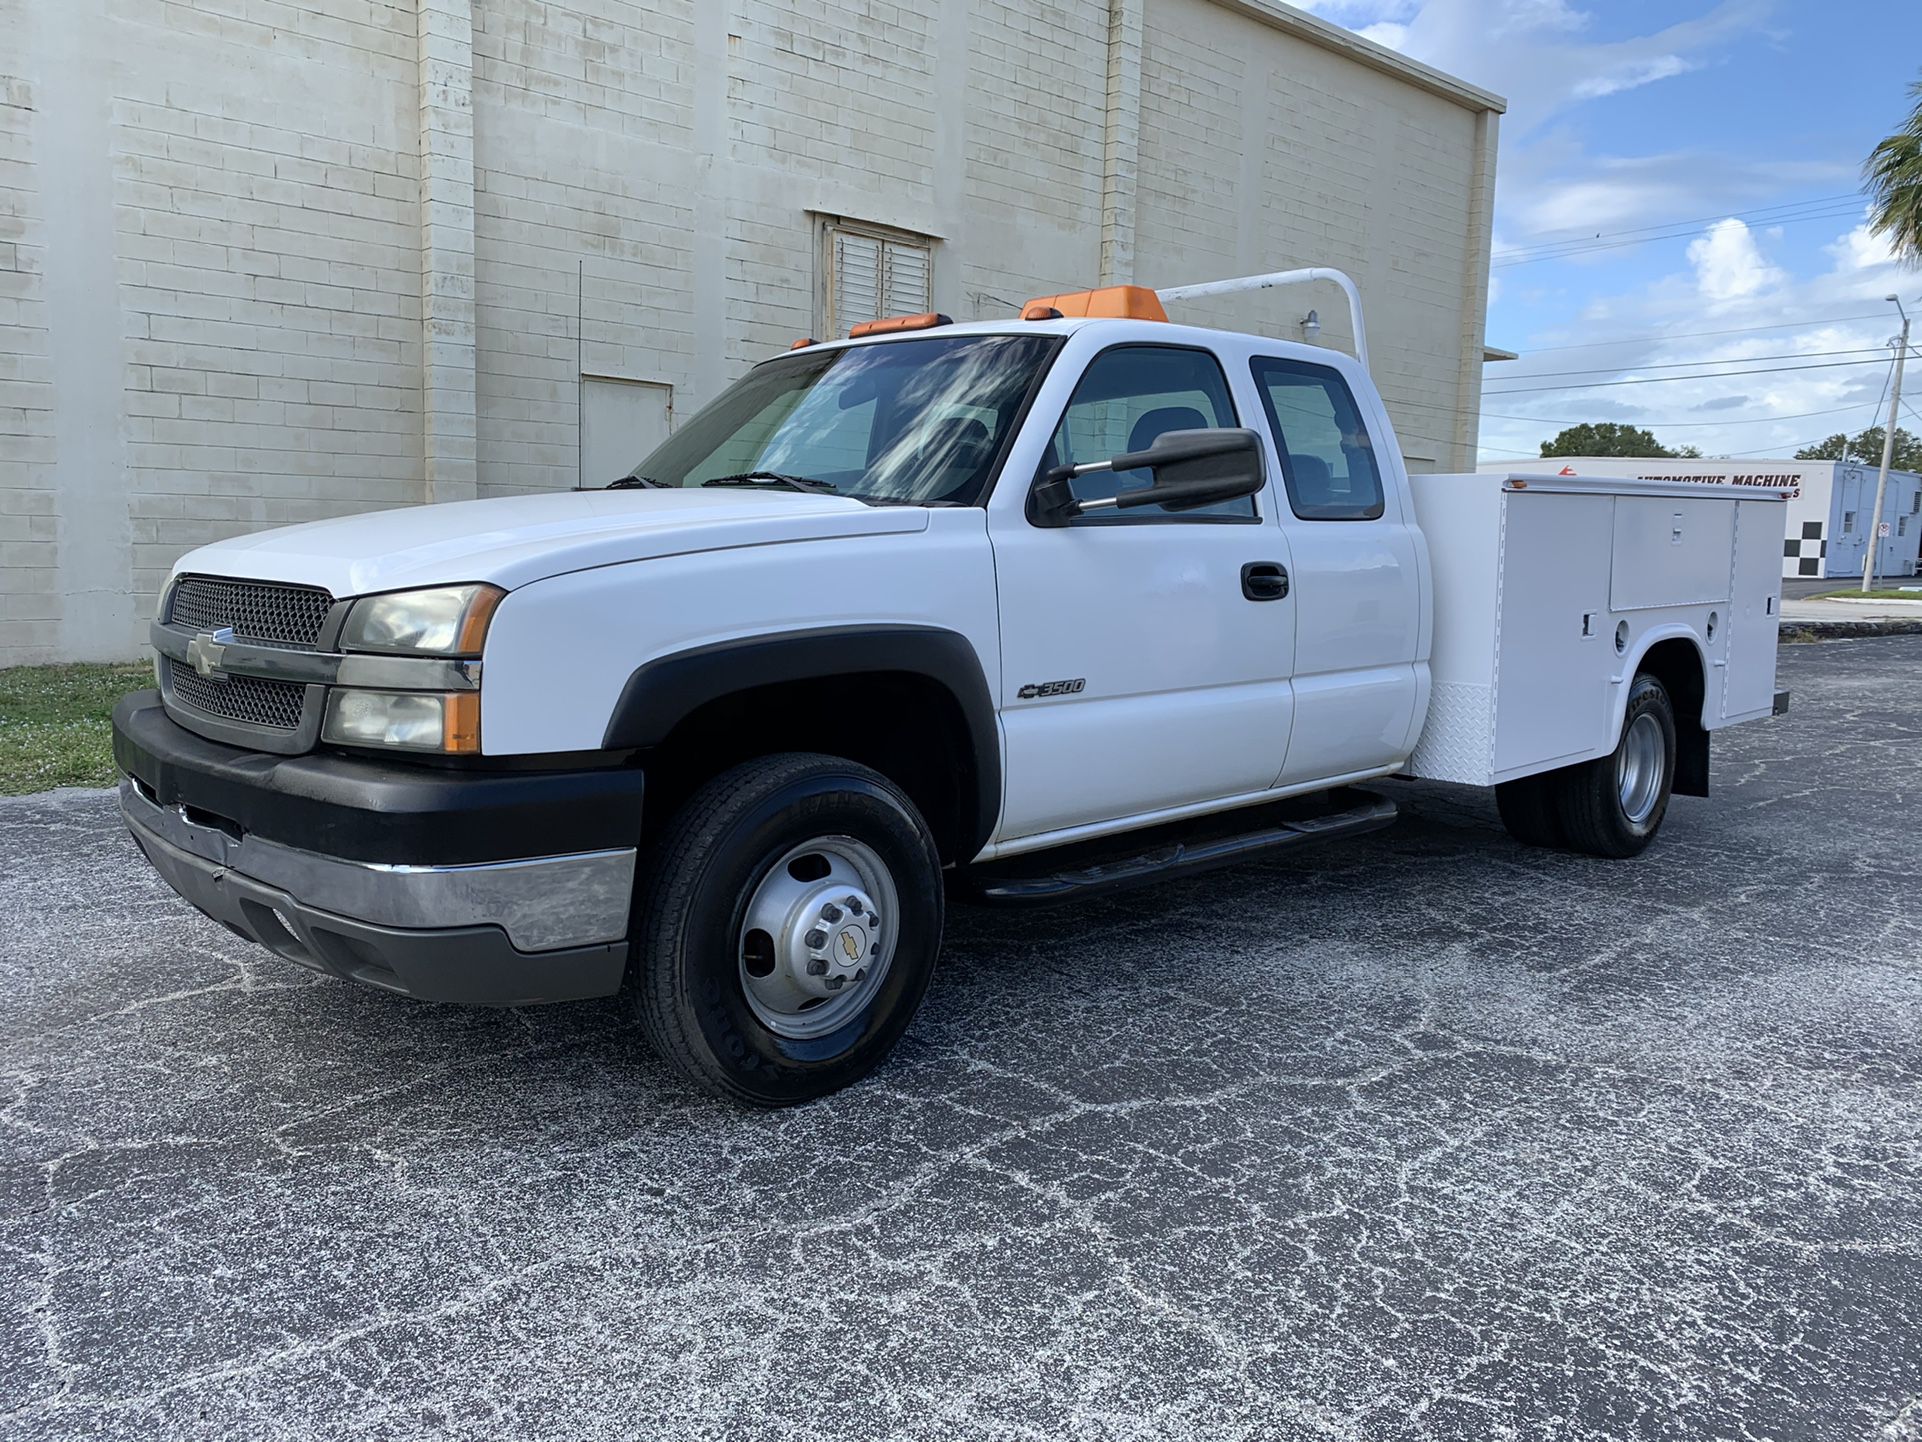 2003 Chevy 3500 Dually Utility Truck